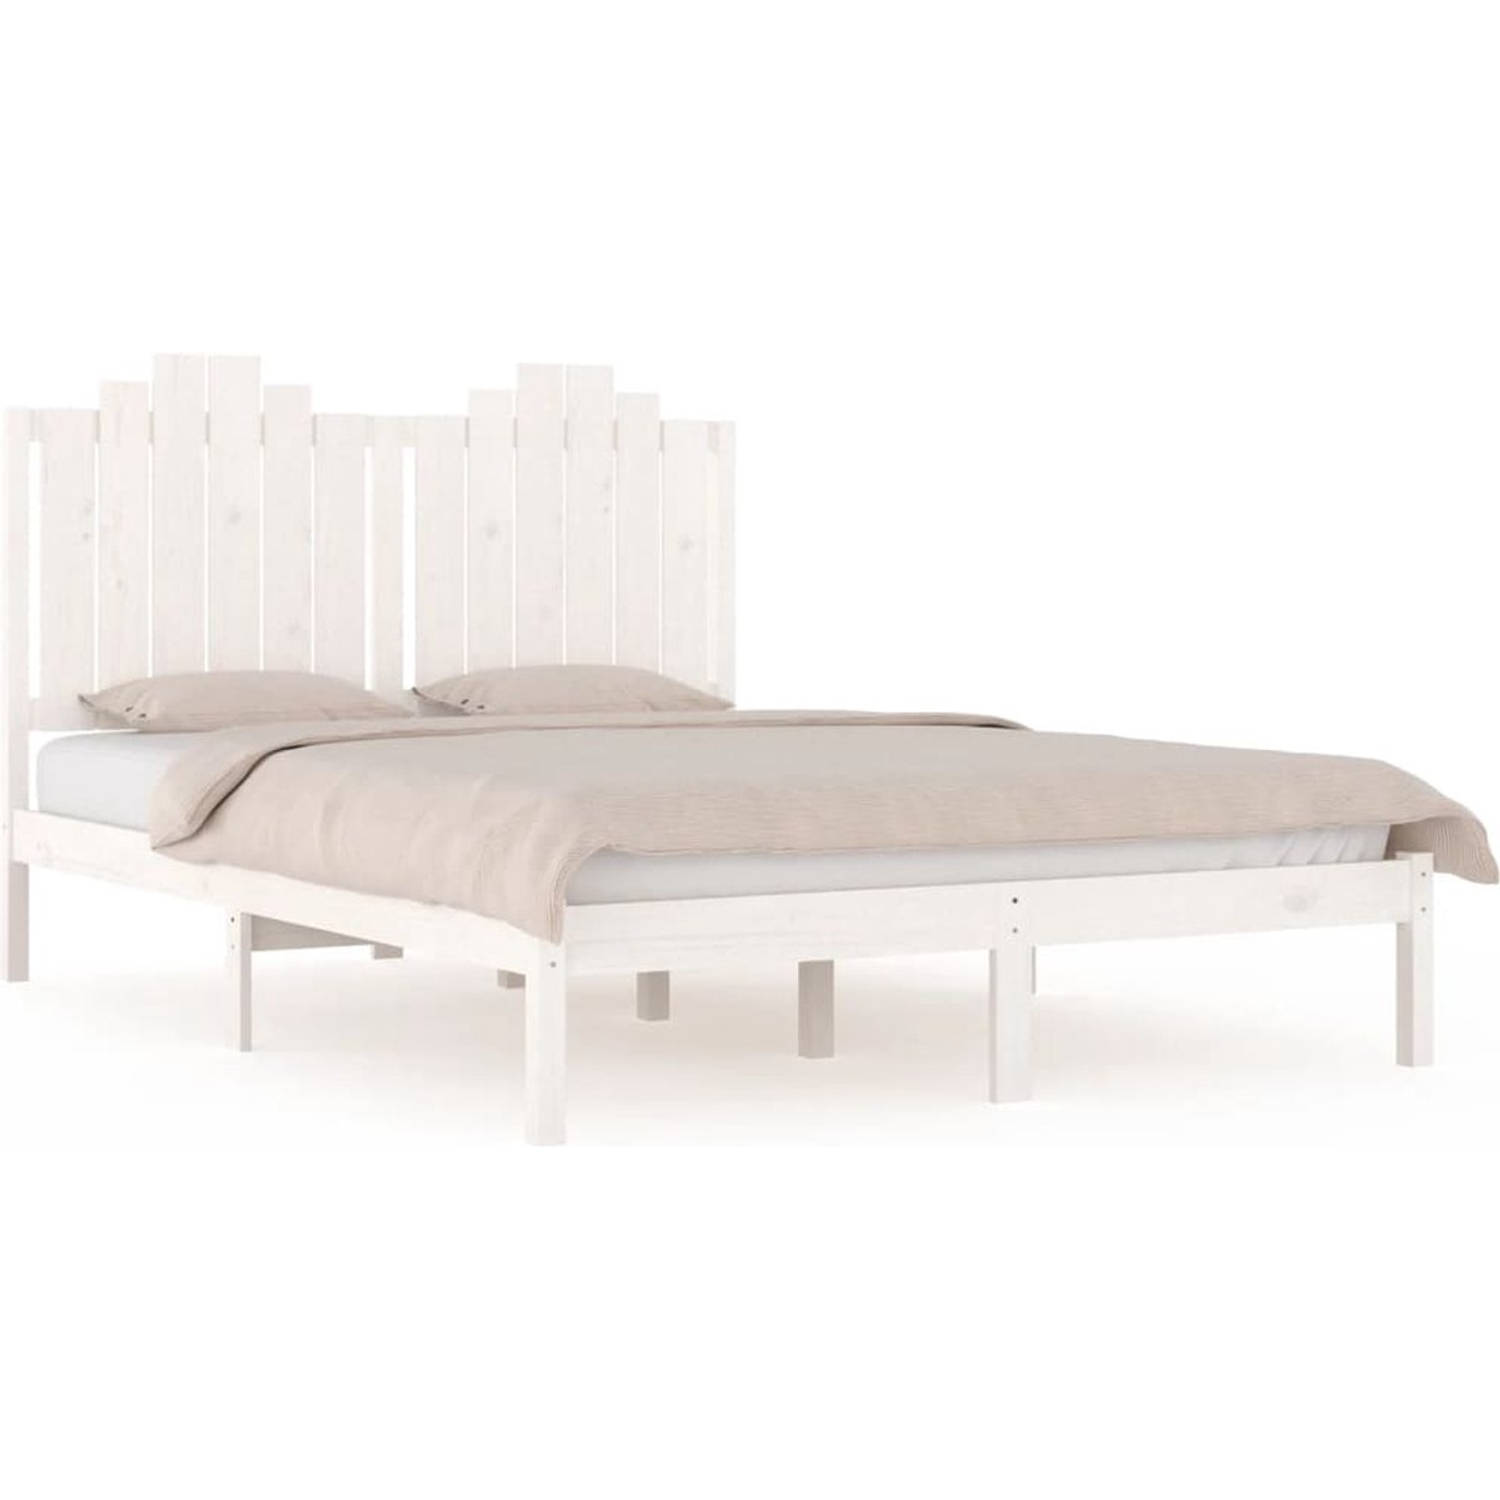 The Living Store Bedframe - Hout - Wit - 195.5 x 125.5 x 110 cm (L x B x H) - 120 x 190 cm (4FT Small Double) - Massief Grenenhout